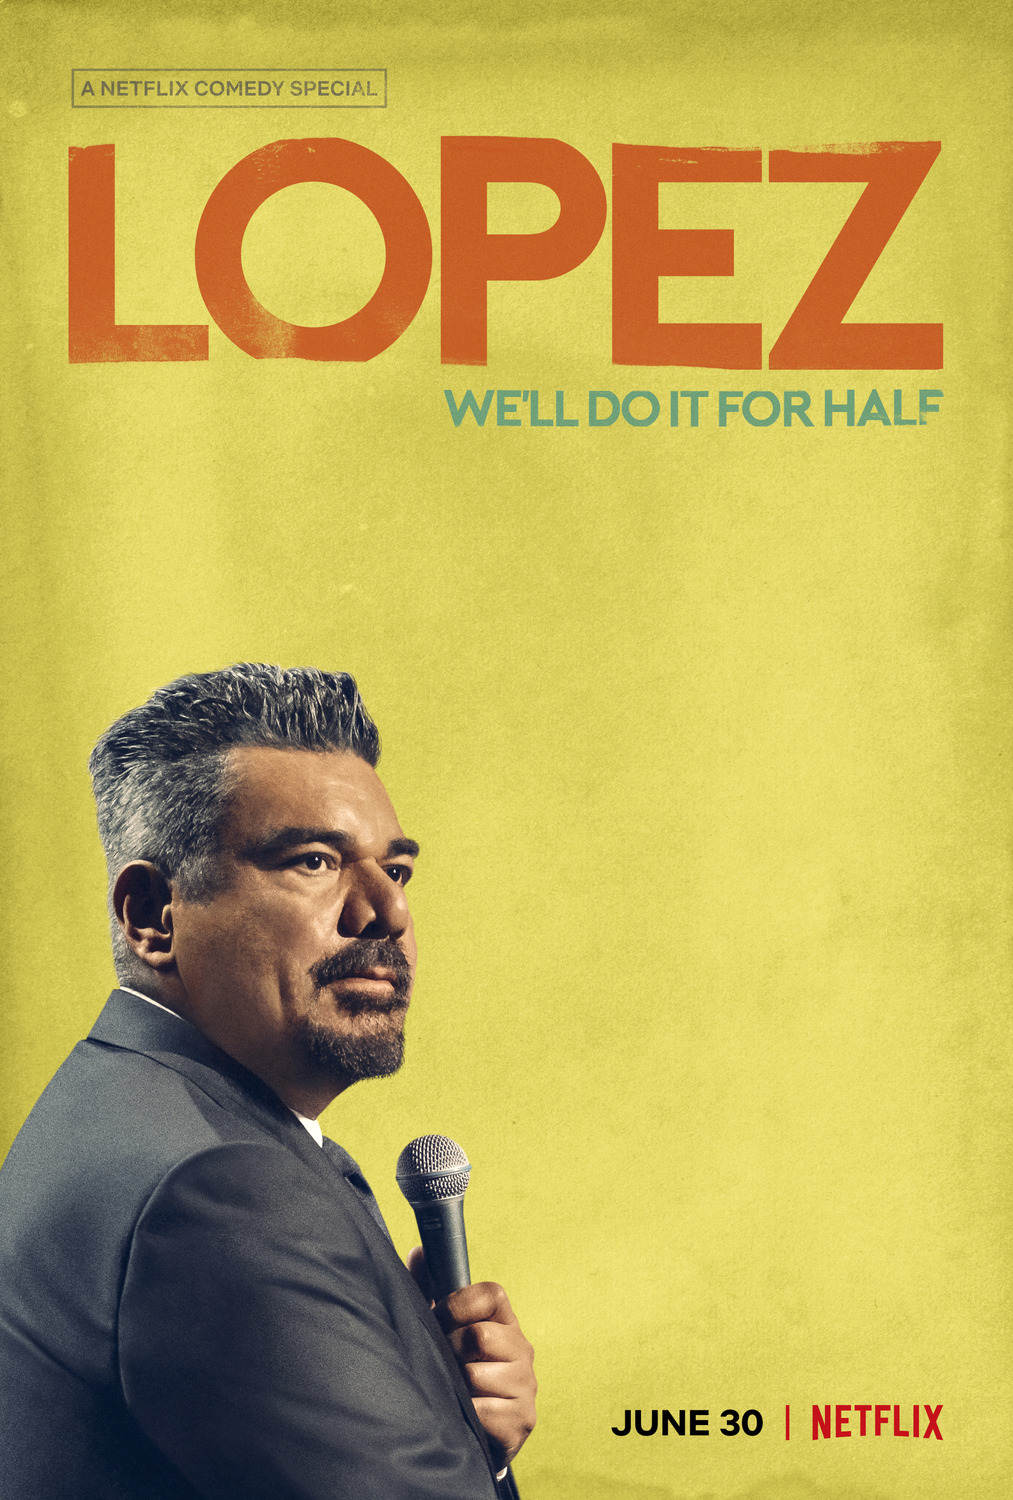 Extra Large TV Poster Image for George Lopez: We'll Do It for Half 